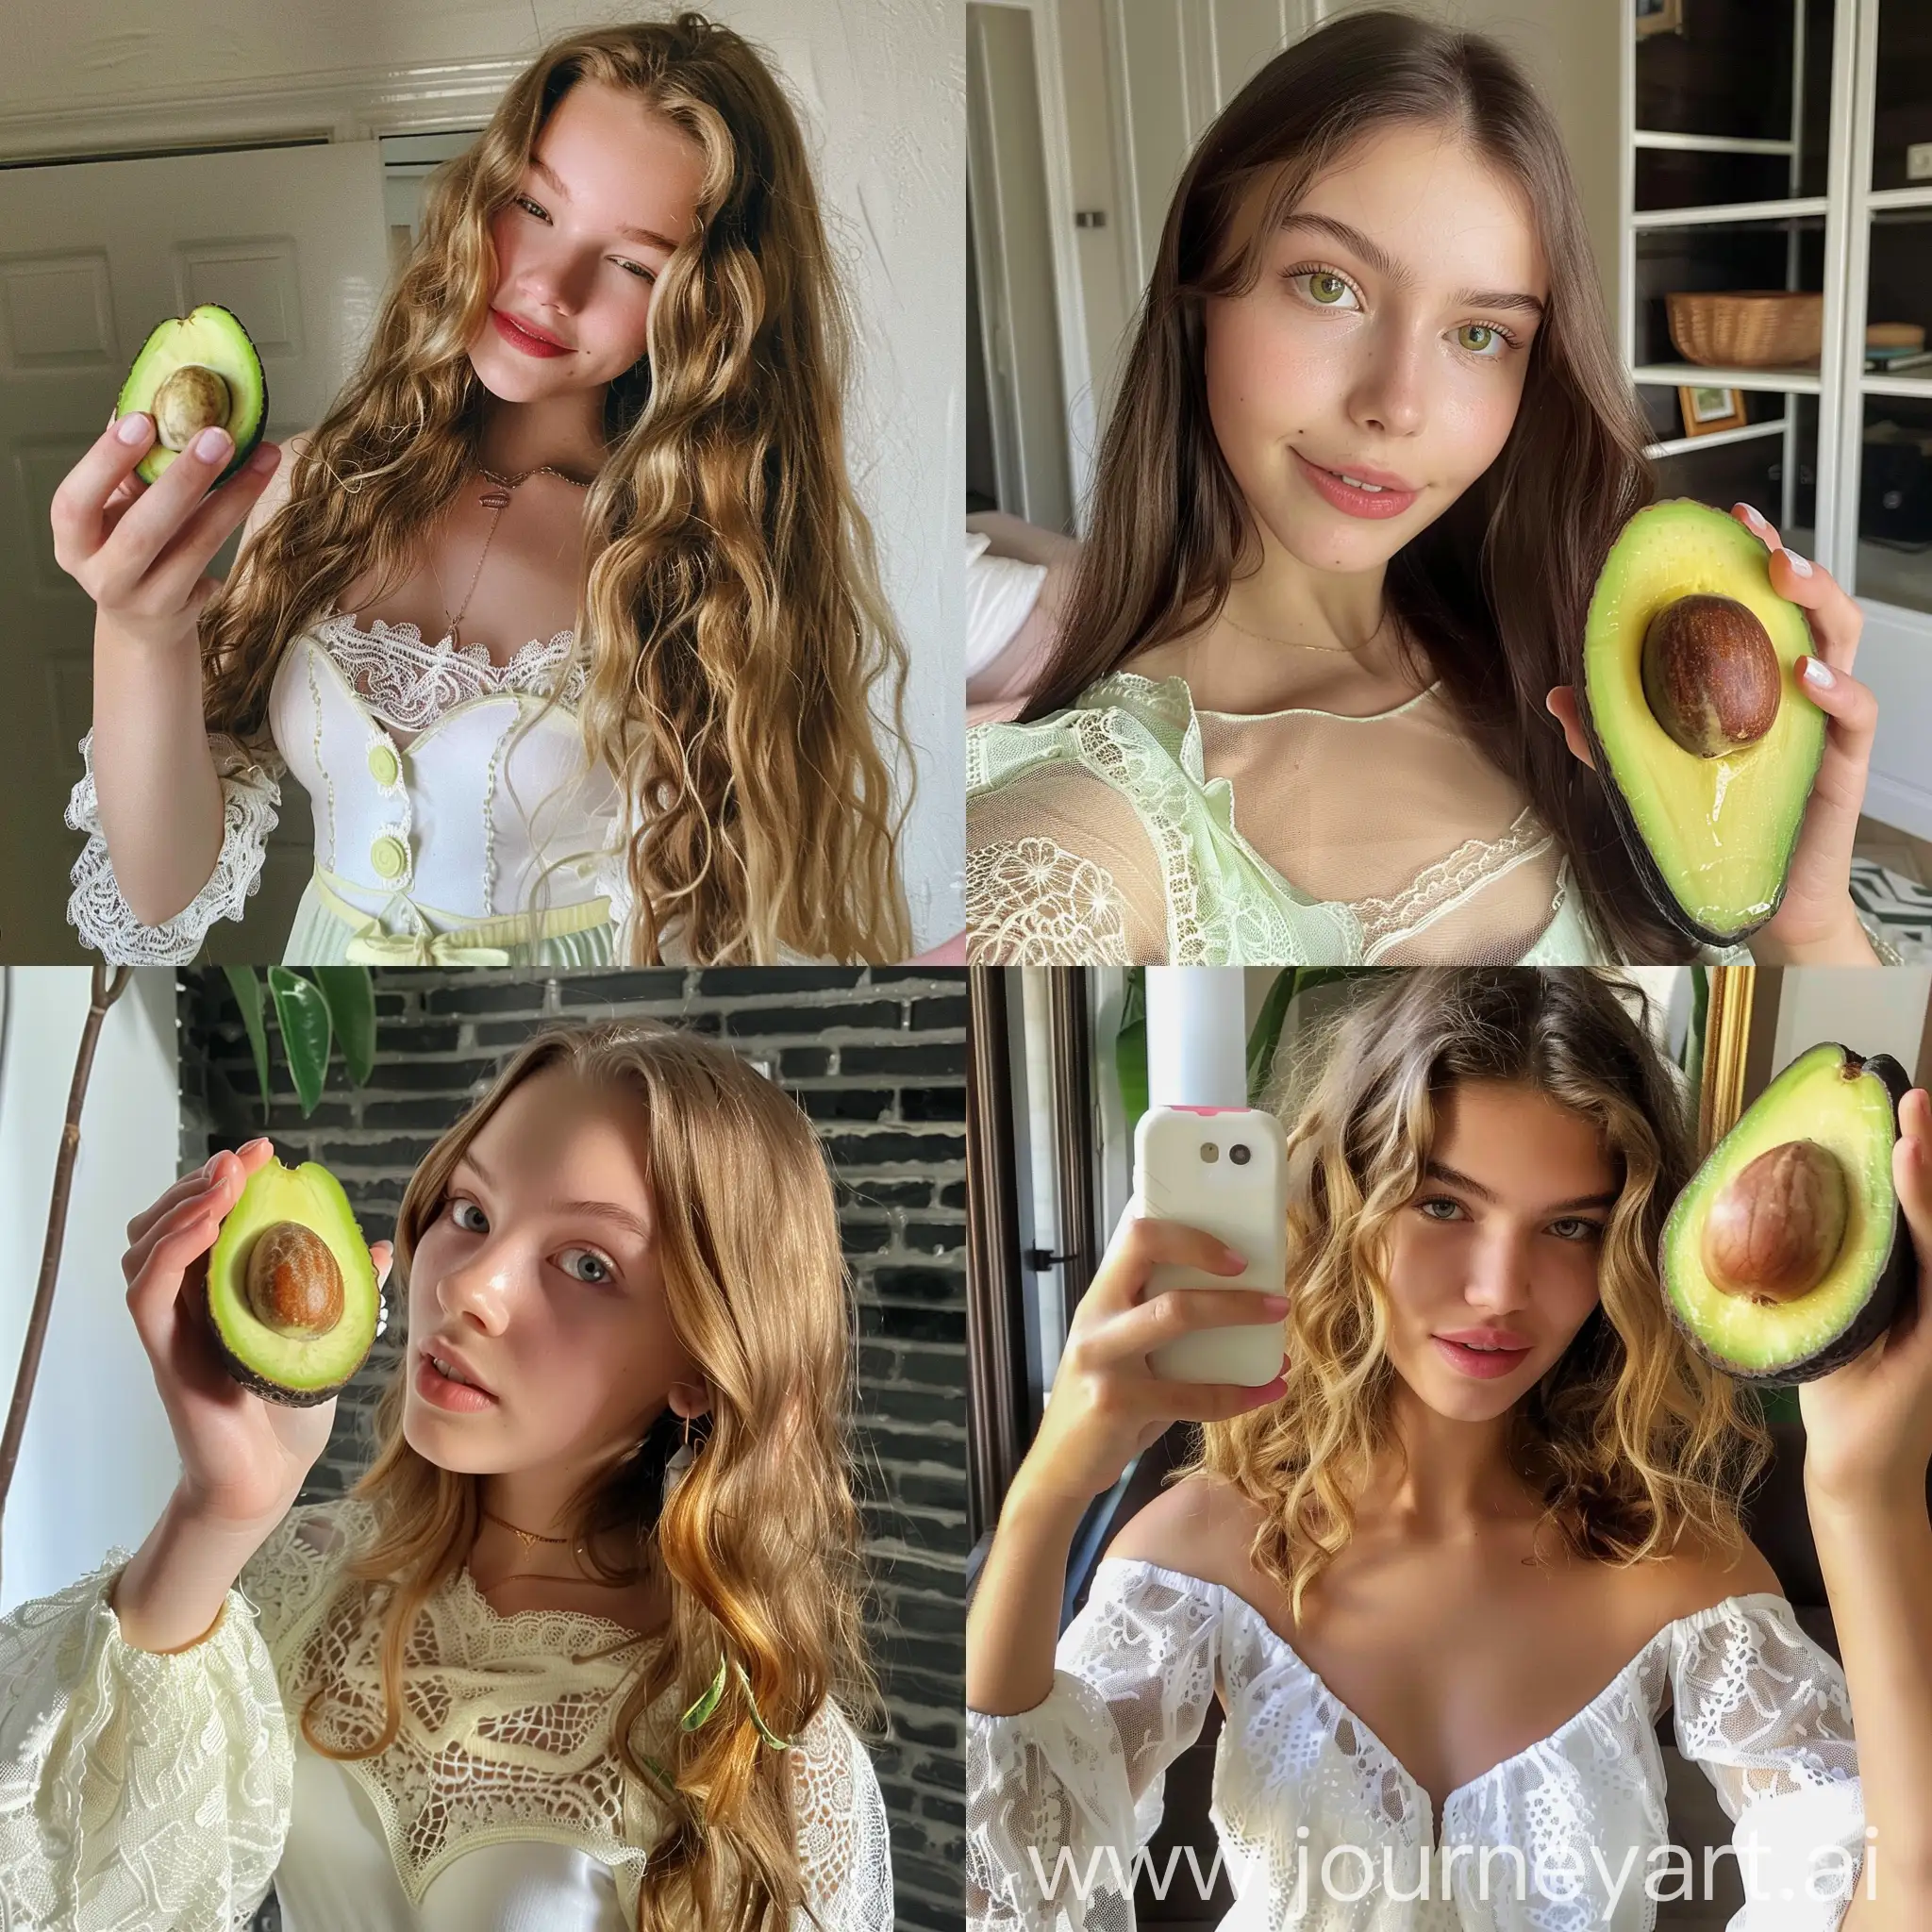 A typical Instagram selfie of a young girl showing her audience an avocado. lace, influencer.